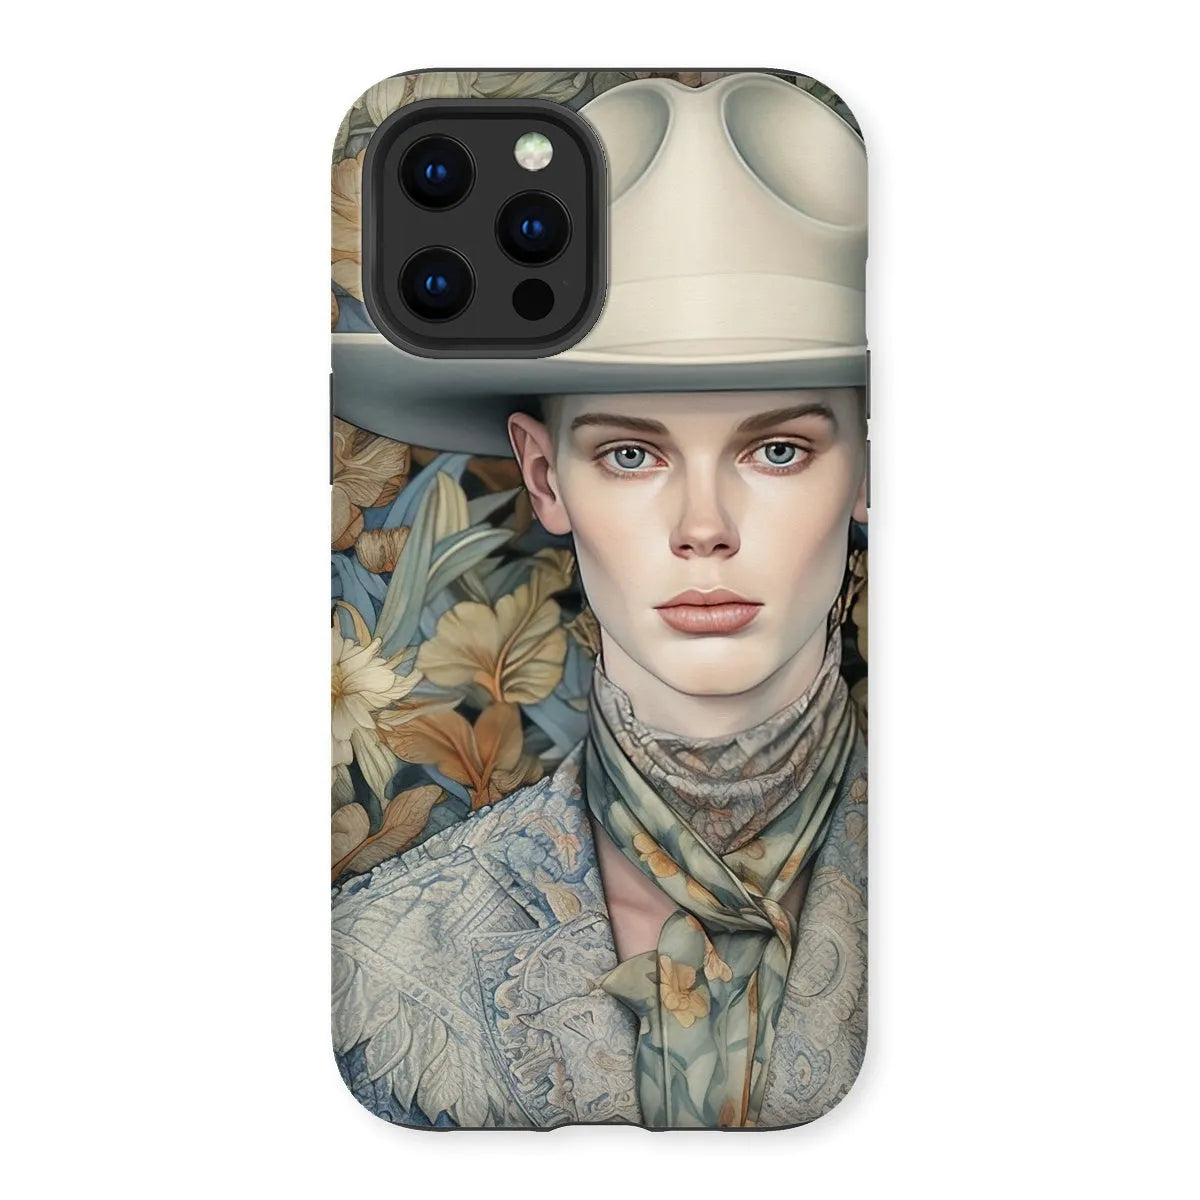 Jasper The Gay Cowboy - Dandy Gay Aesthetic Art Phone Case - Iphone 12 Pro Max / Matte - Mobile Phone Cases - Aesthetic